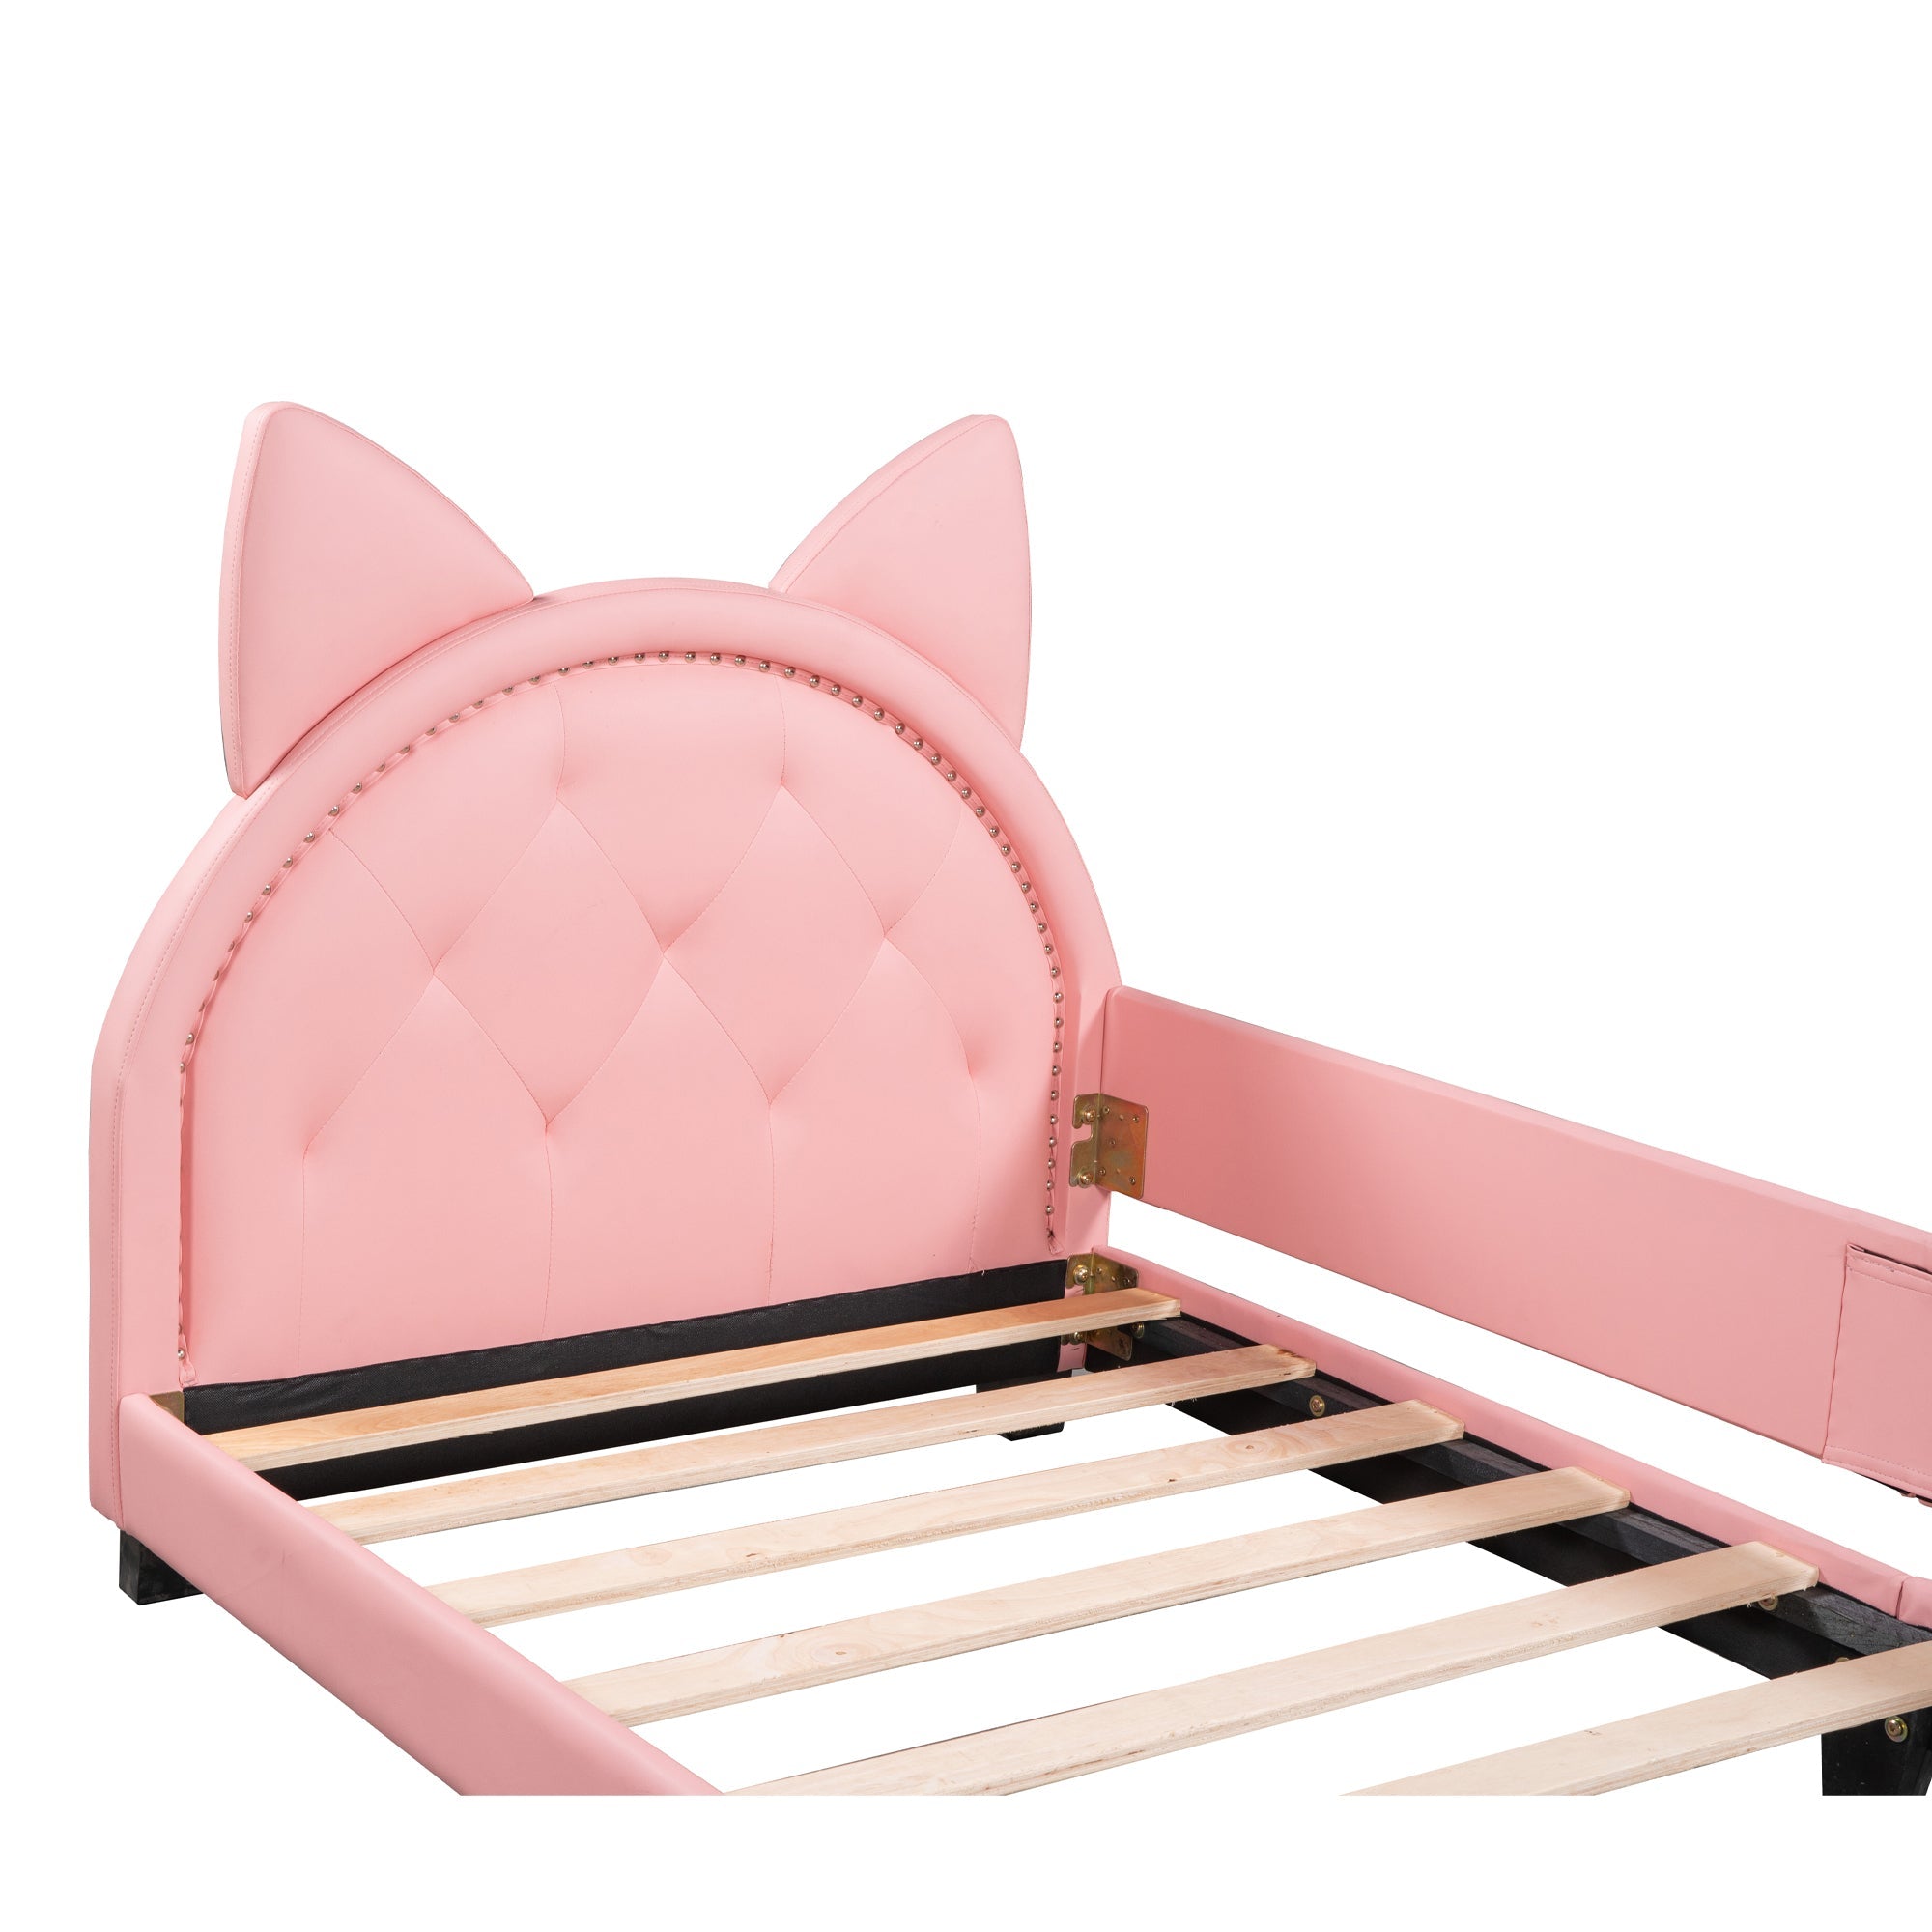 Twin Size Upholstered Daybed with Carton Ears Shaped Headboard | Pink | Stylish & Functional